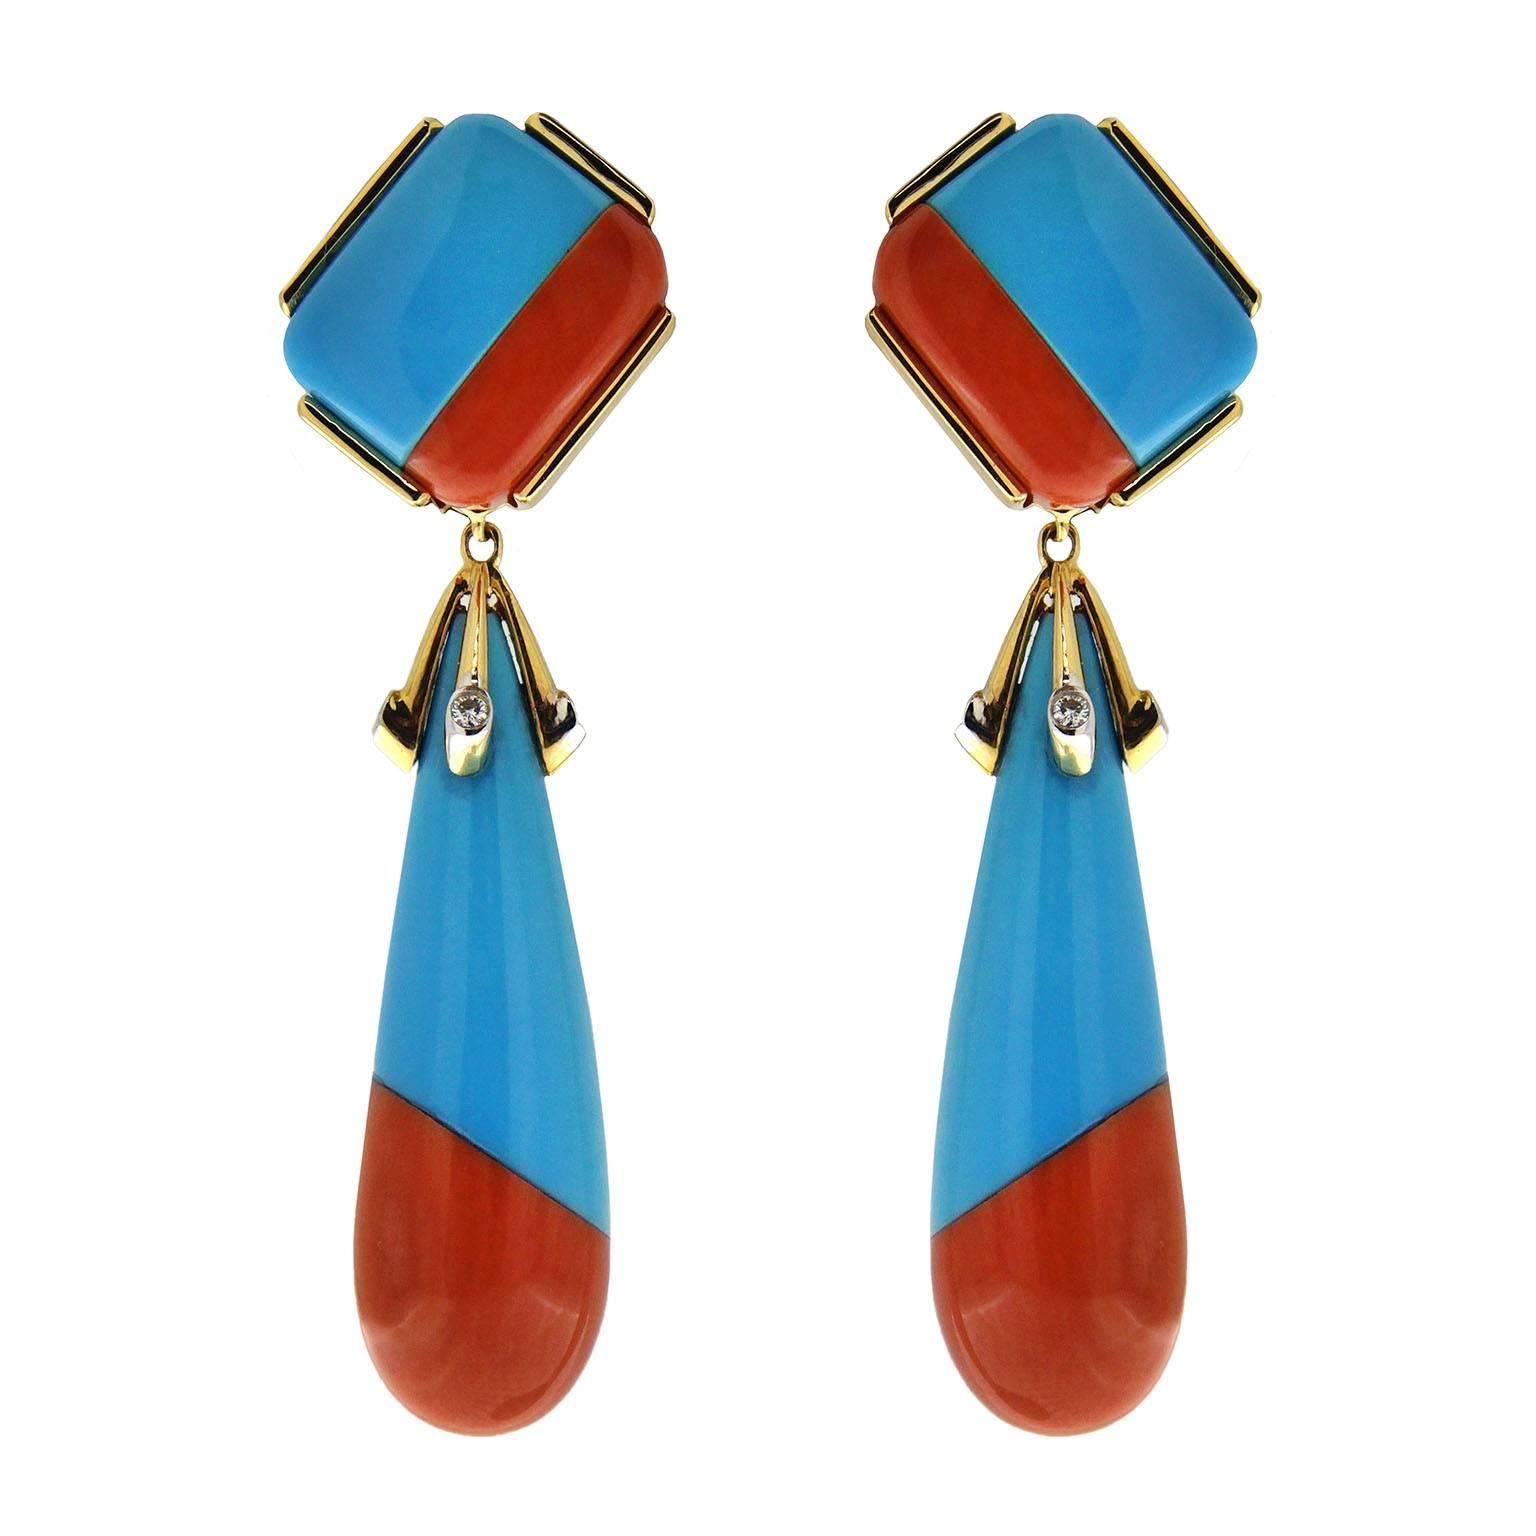 Valentin Magro Turquoise and Coral Diamond Gold Drop Earrings with Diamonds